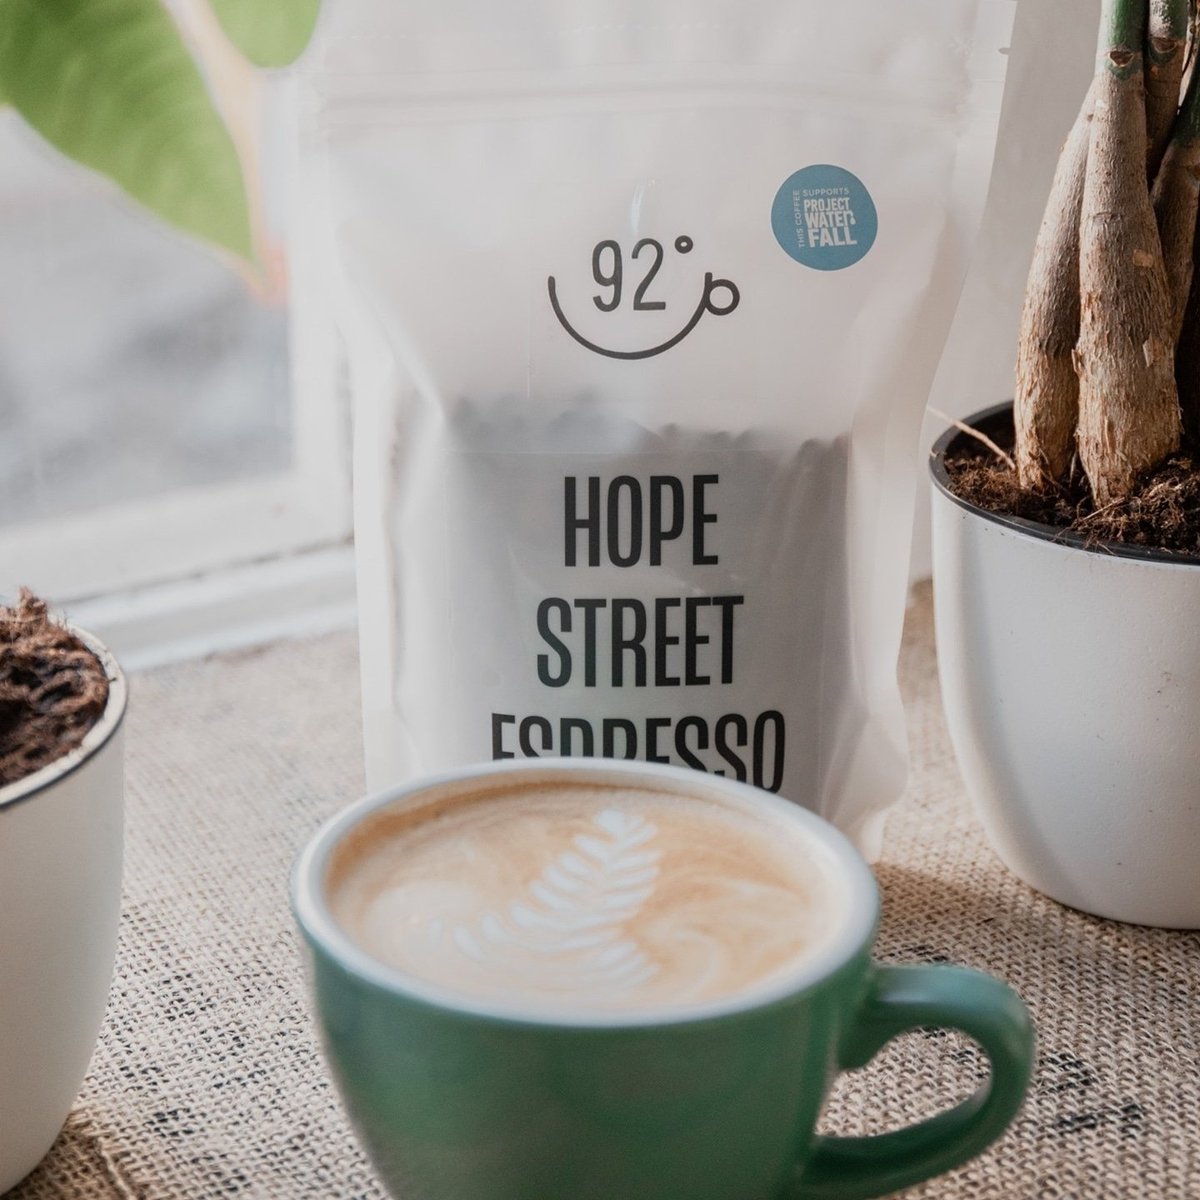 Morning ☕ Let's grab some @92degrees_ & get going! Luckily their amazing coffee is available on LIDS 😊 Pop some in your next order & kick start your day right.